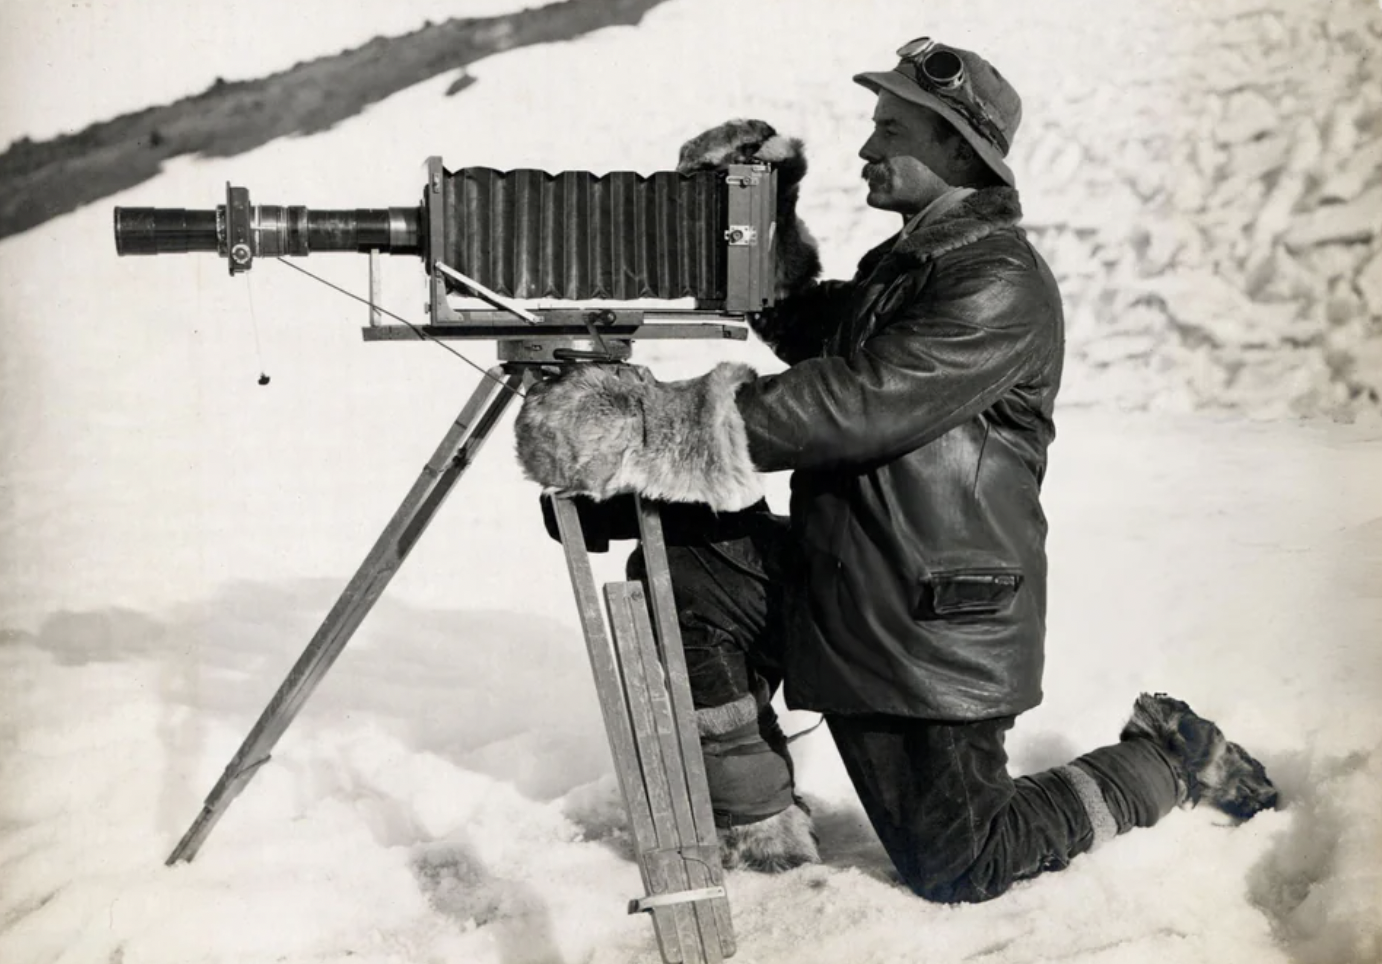 Herbert Ponting and telephoto apparatus. Ponting was the expedition photographer and cinematographer for Robert Falcon Scott's Terra Nova Expedition of 1910-1913, to the Ross Sea and South Pole. Antarctica, 1912.